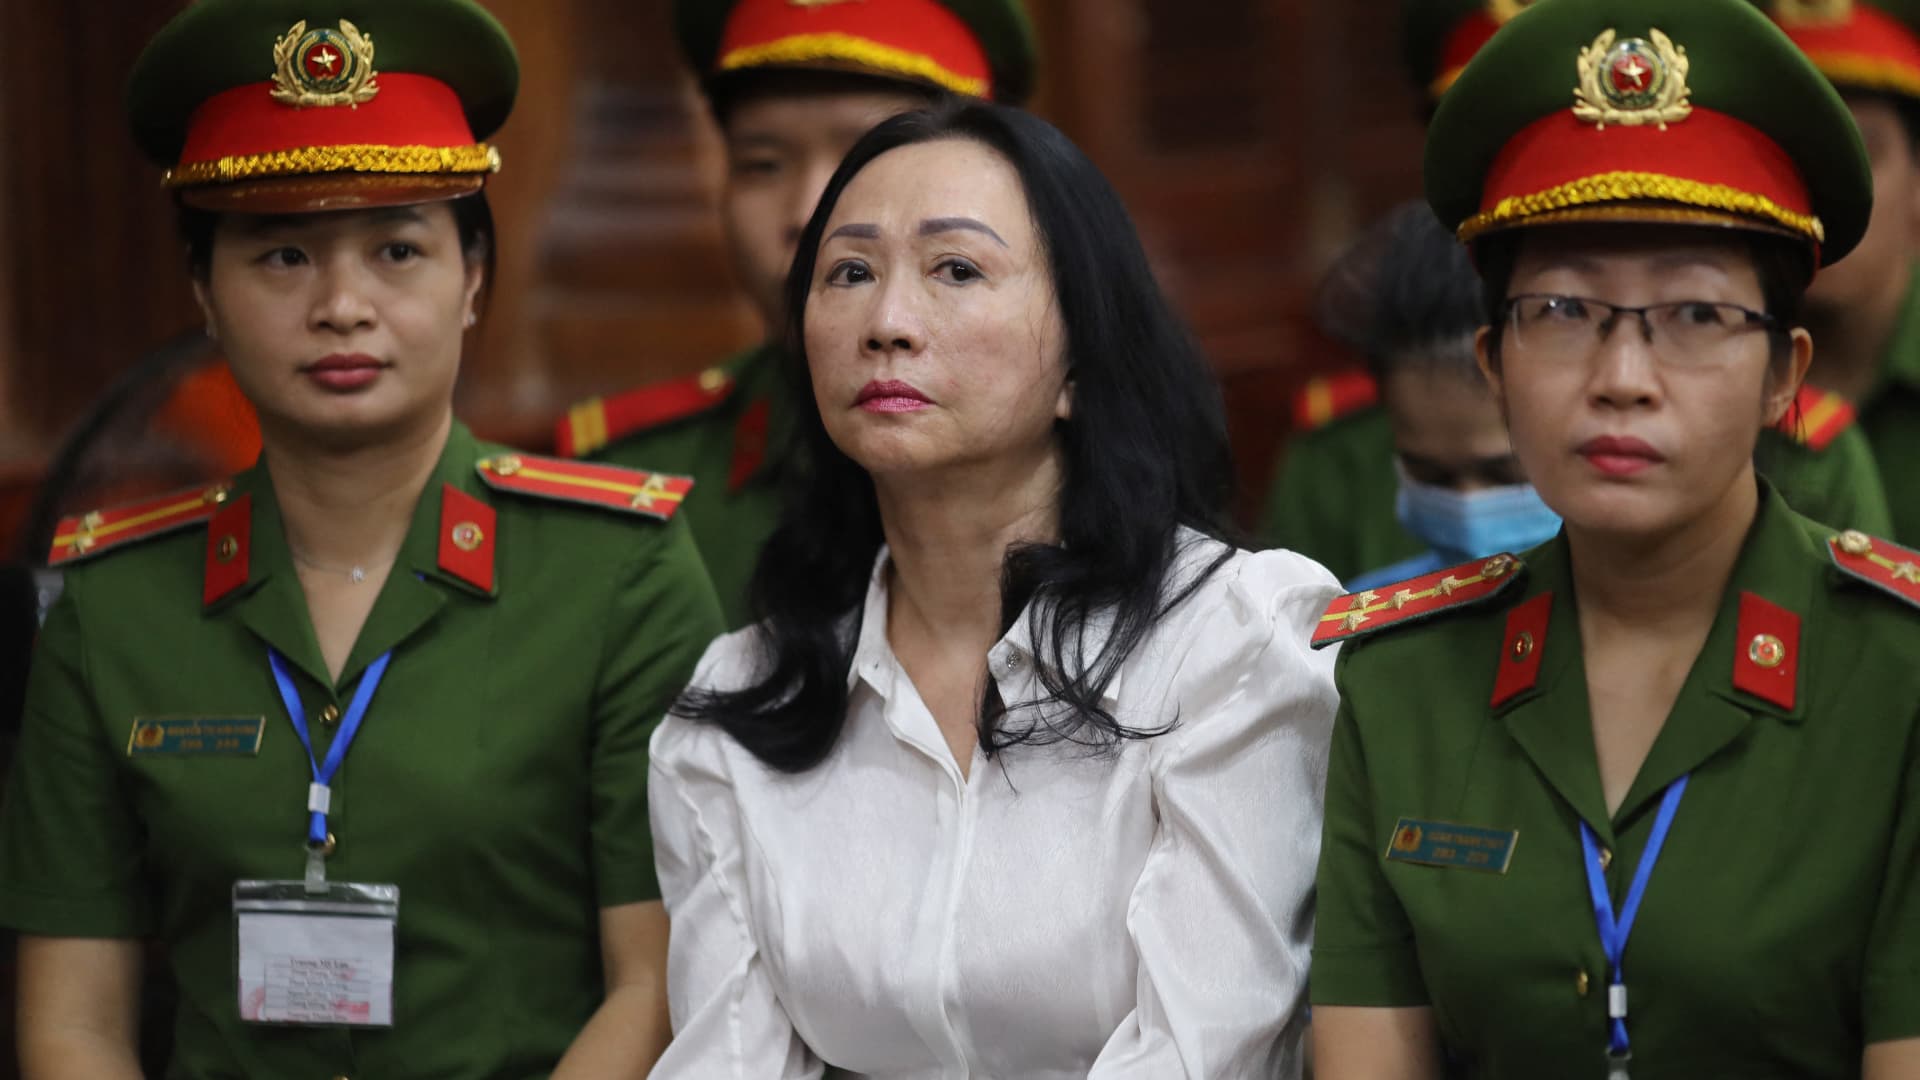 Vietnam mounts ‘unprecedented’ $24 billion rescue for bank engulfed in giant fraud, documents show